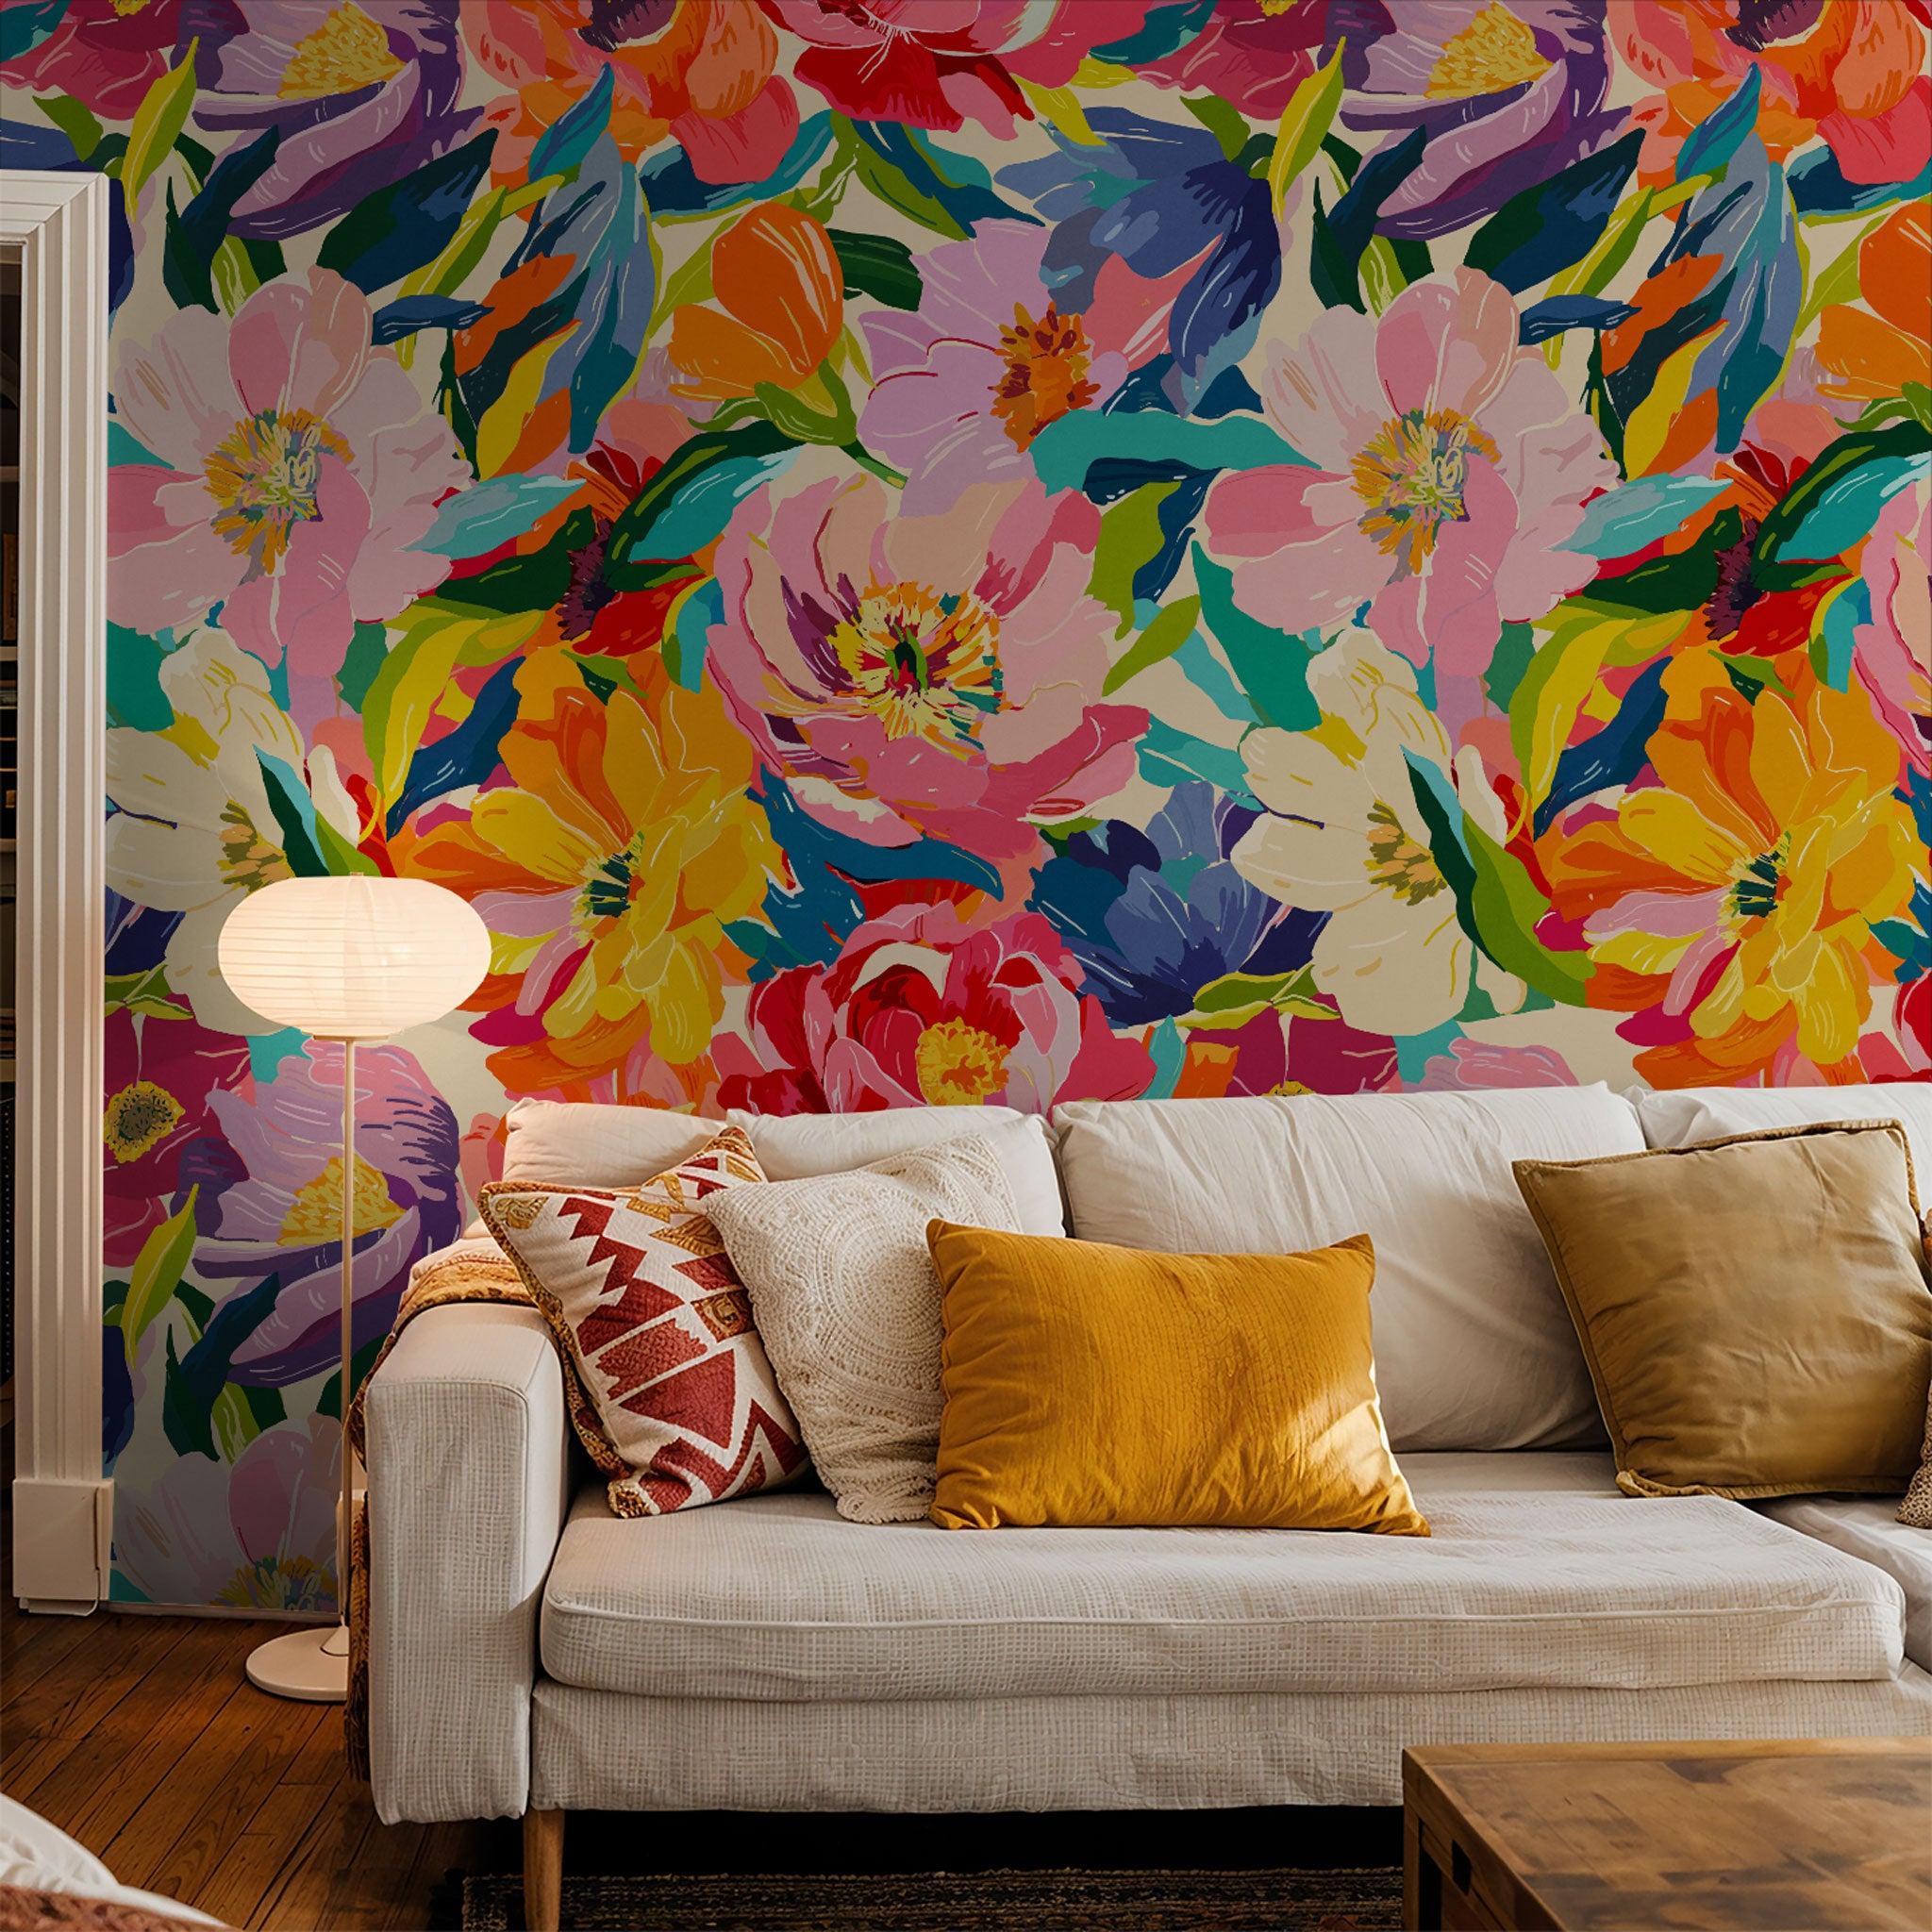 "Vibrant Rebbie Wallpaper by Wall Blush in a cozy living room with floral design focus"